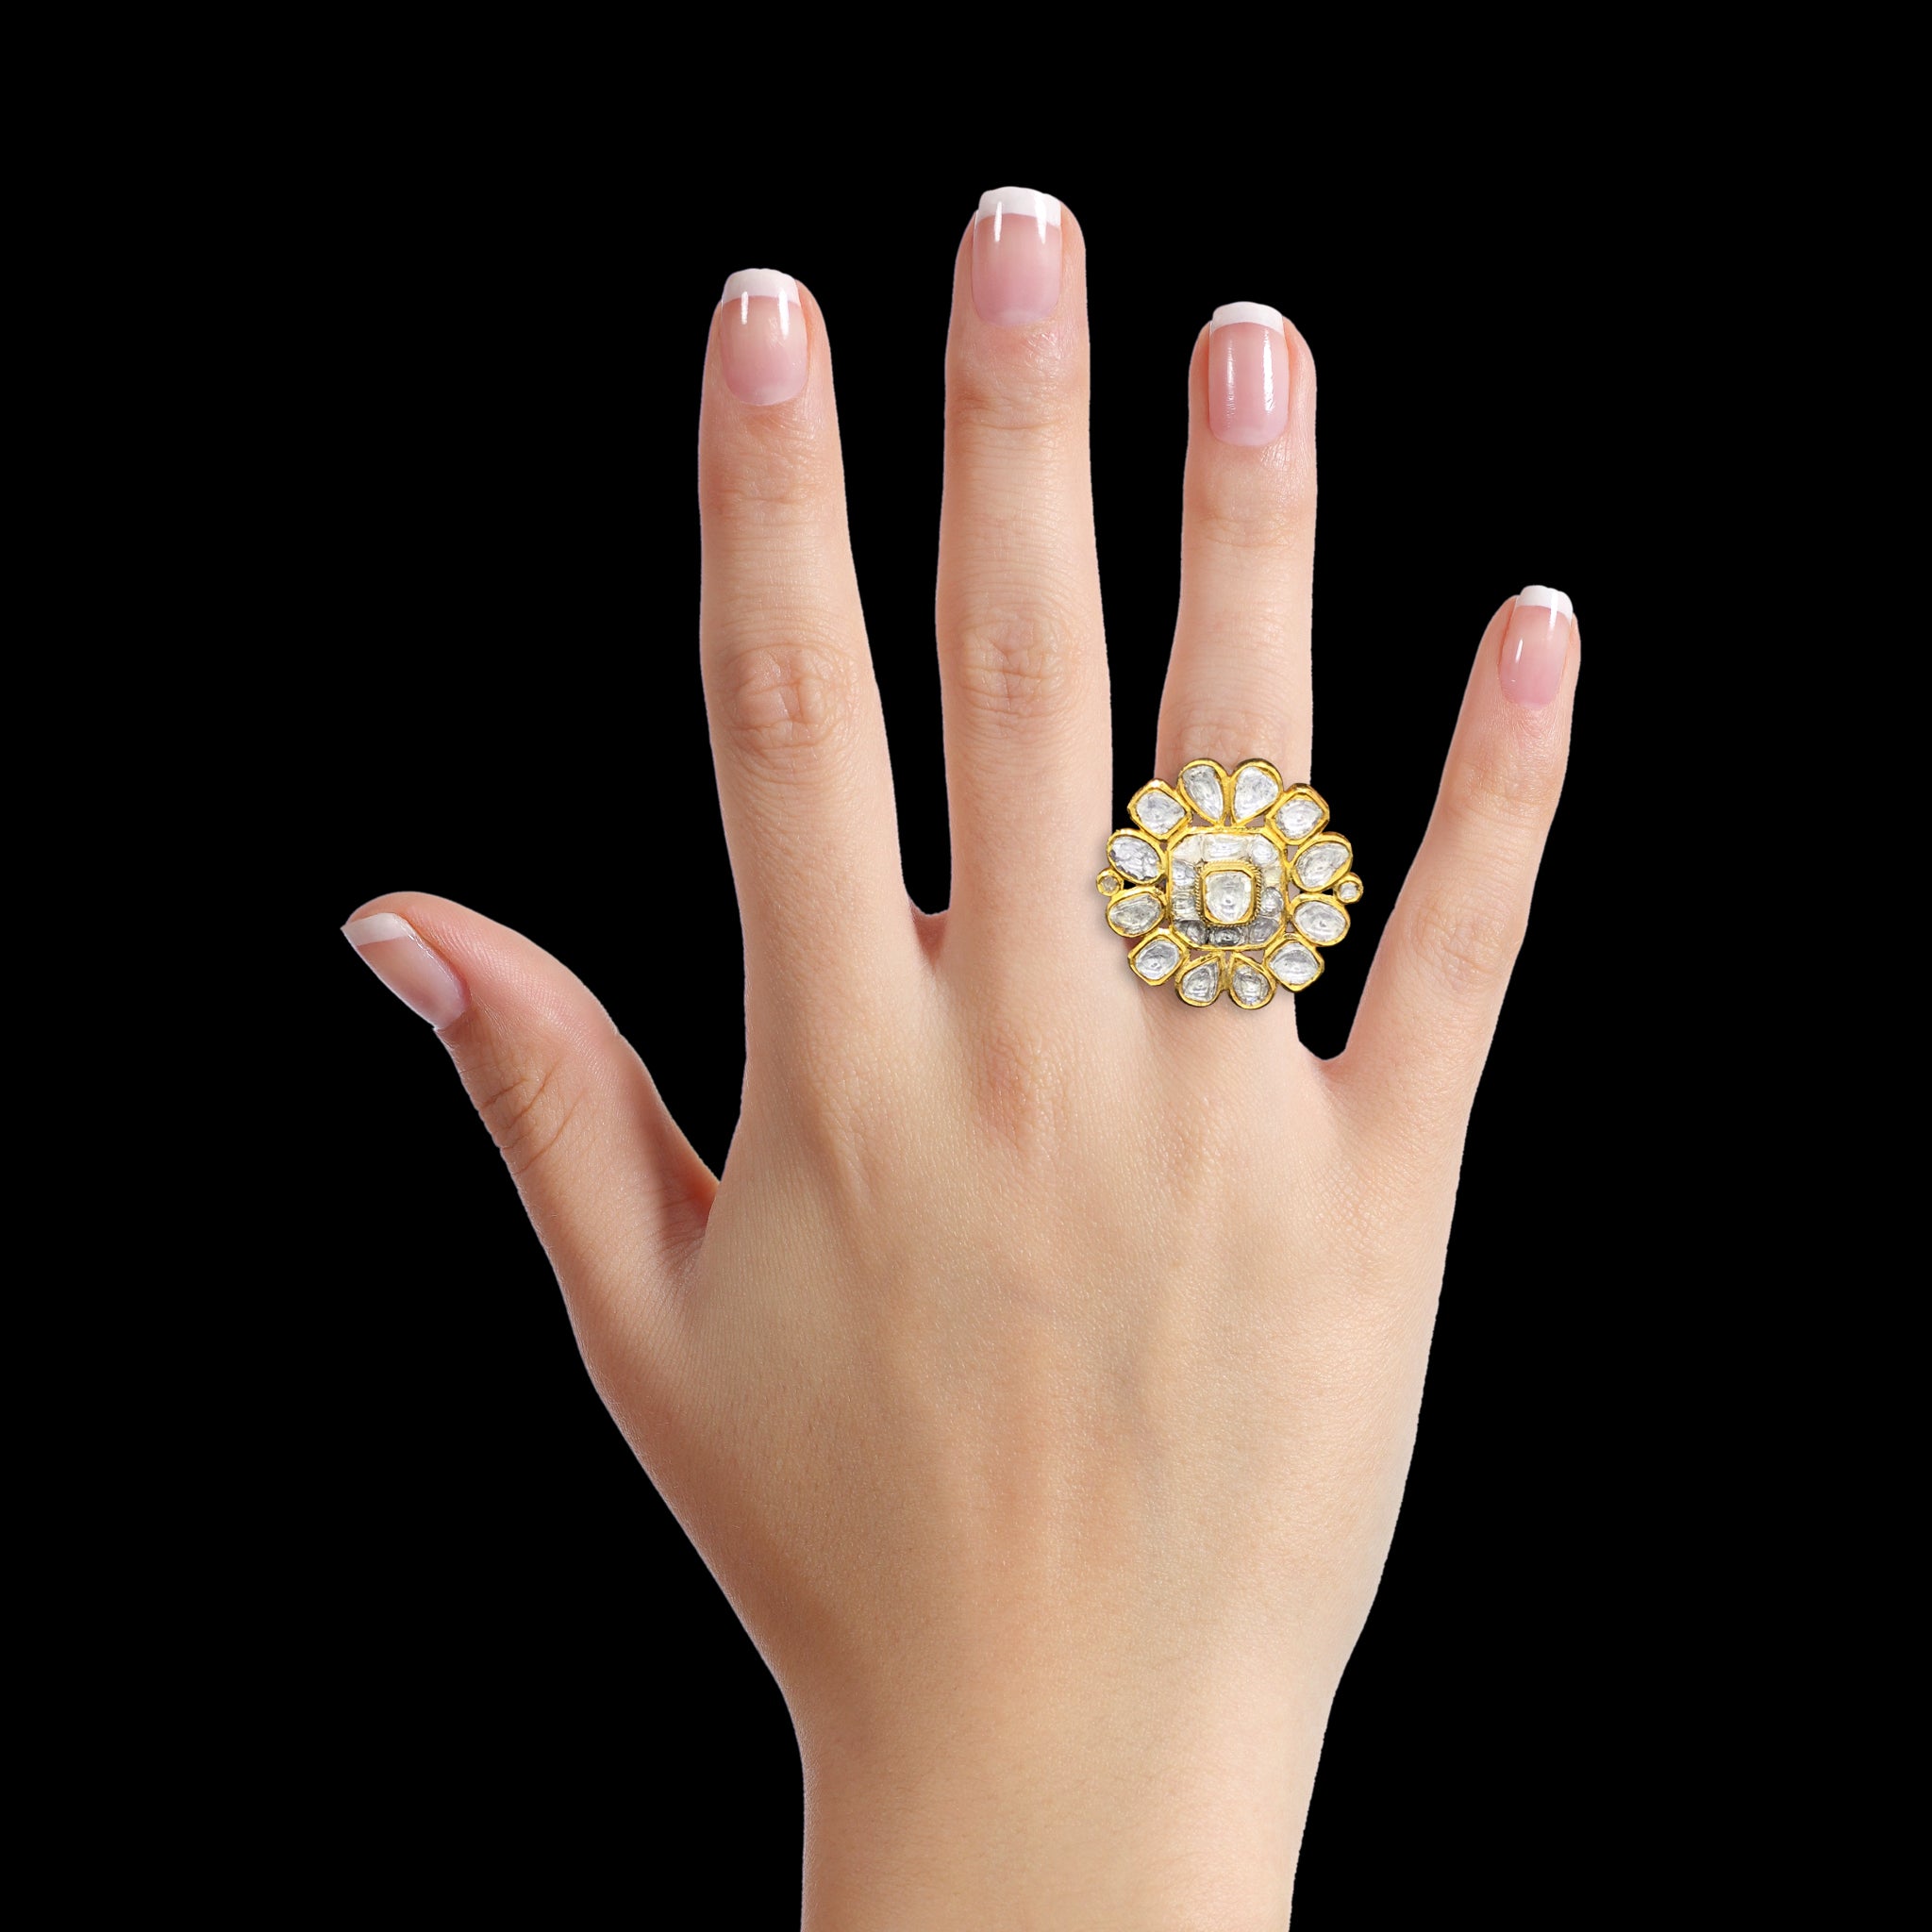 18k Gold and Diamond Polki floral Ring with far sized uncuts - G. K. Ratnam